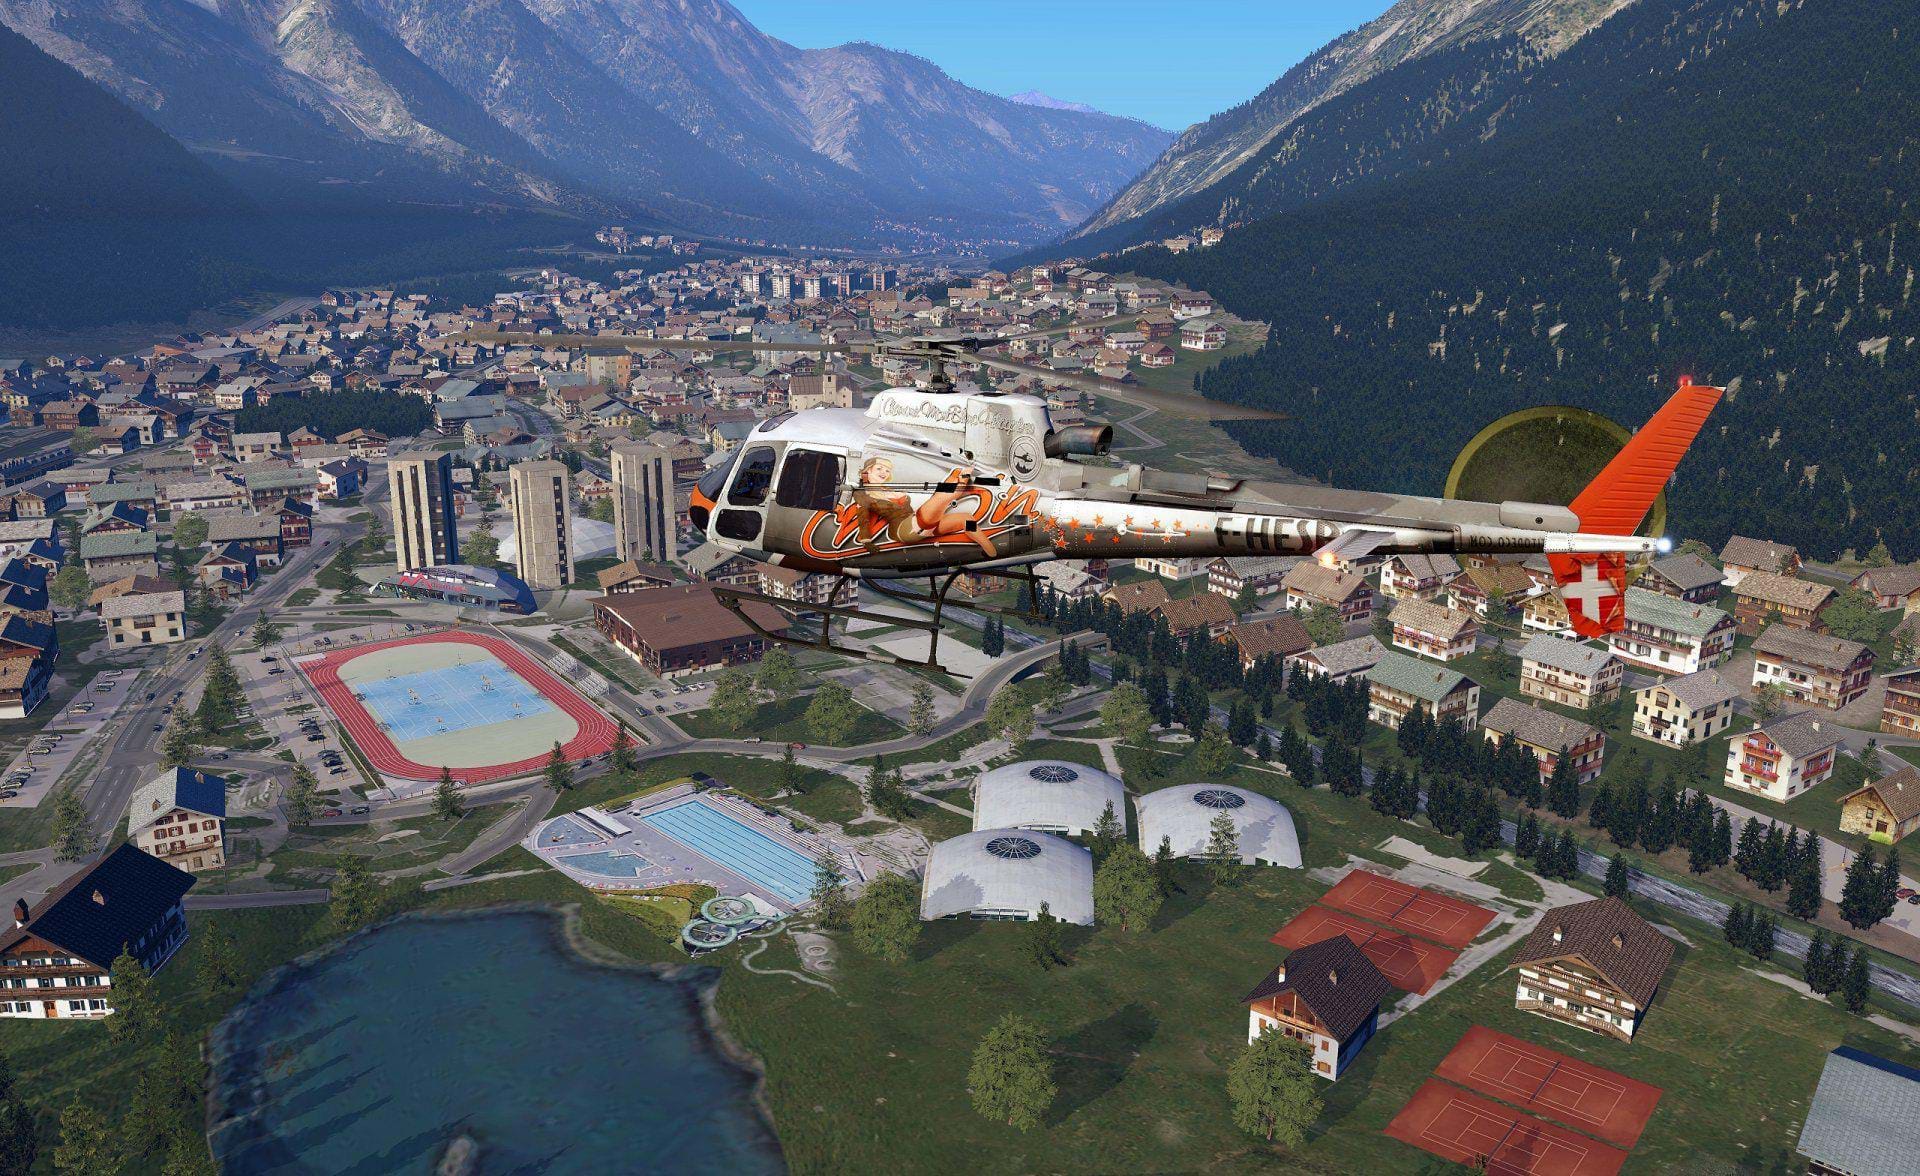 Frank Dainese and Fabio Bellini Mont Blanc for X-Plane - Chamomix